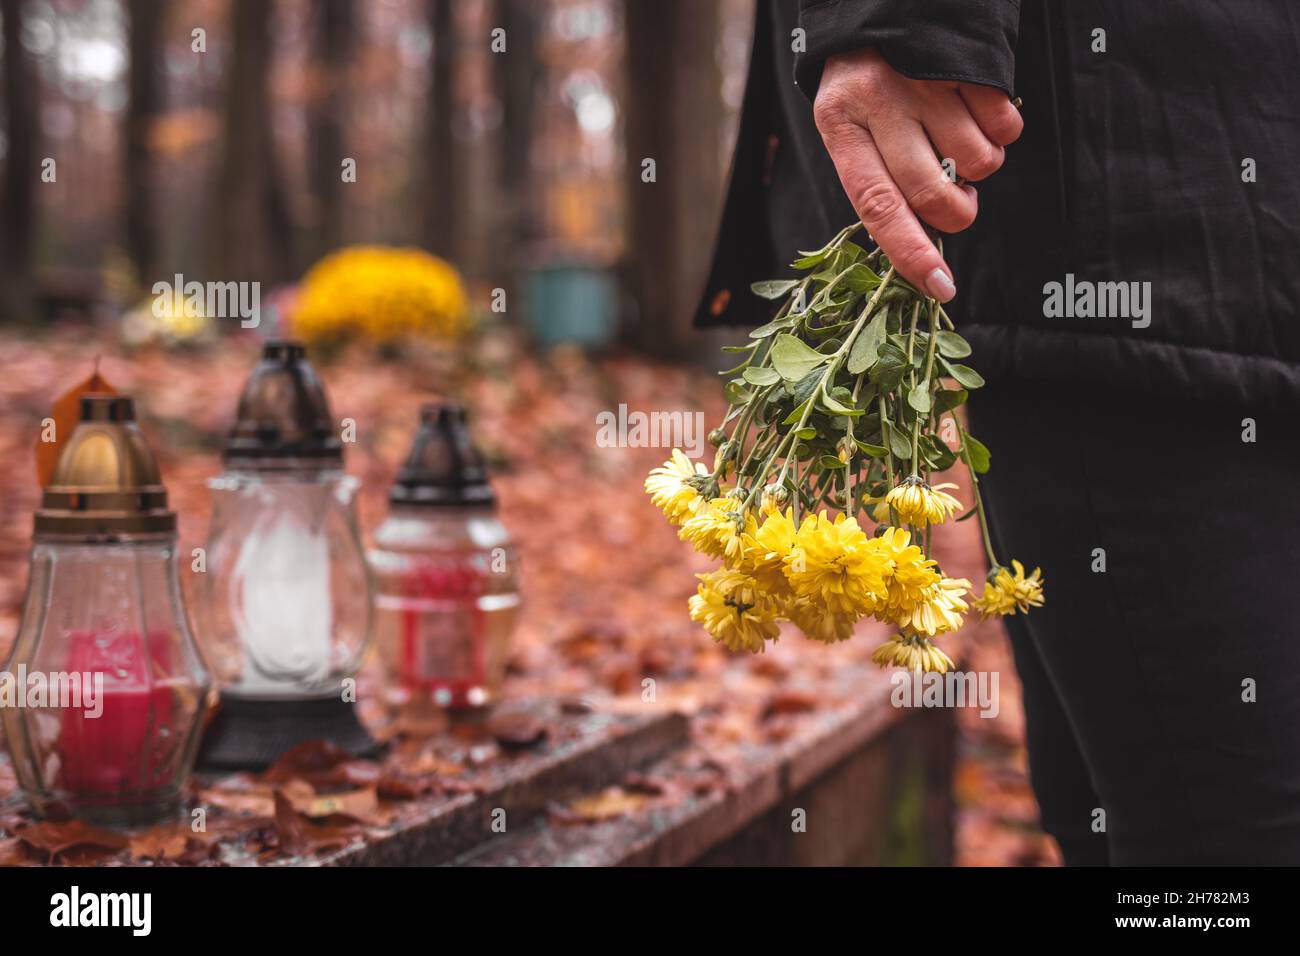 Paying respect for dead person. Mourning woman holding flowers in hands and standing at grave in cemetery. Stock Photo